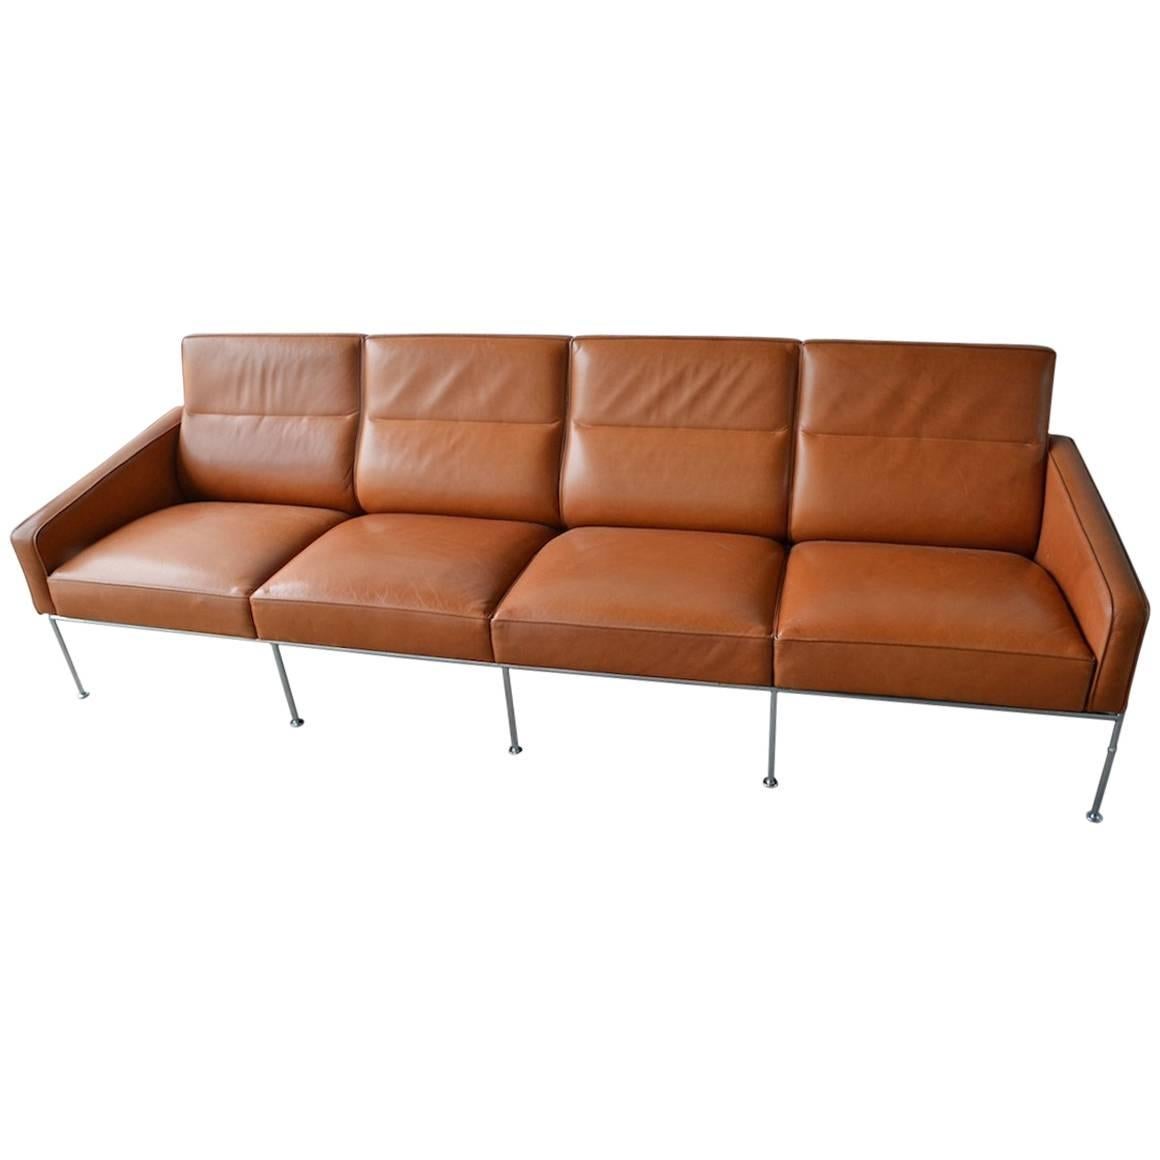 Rare Leather Arne Jacobsen Series 3300 Four-Seat Sofa For Sale